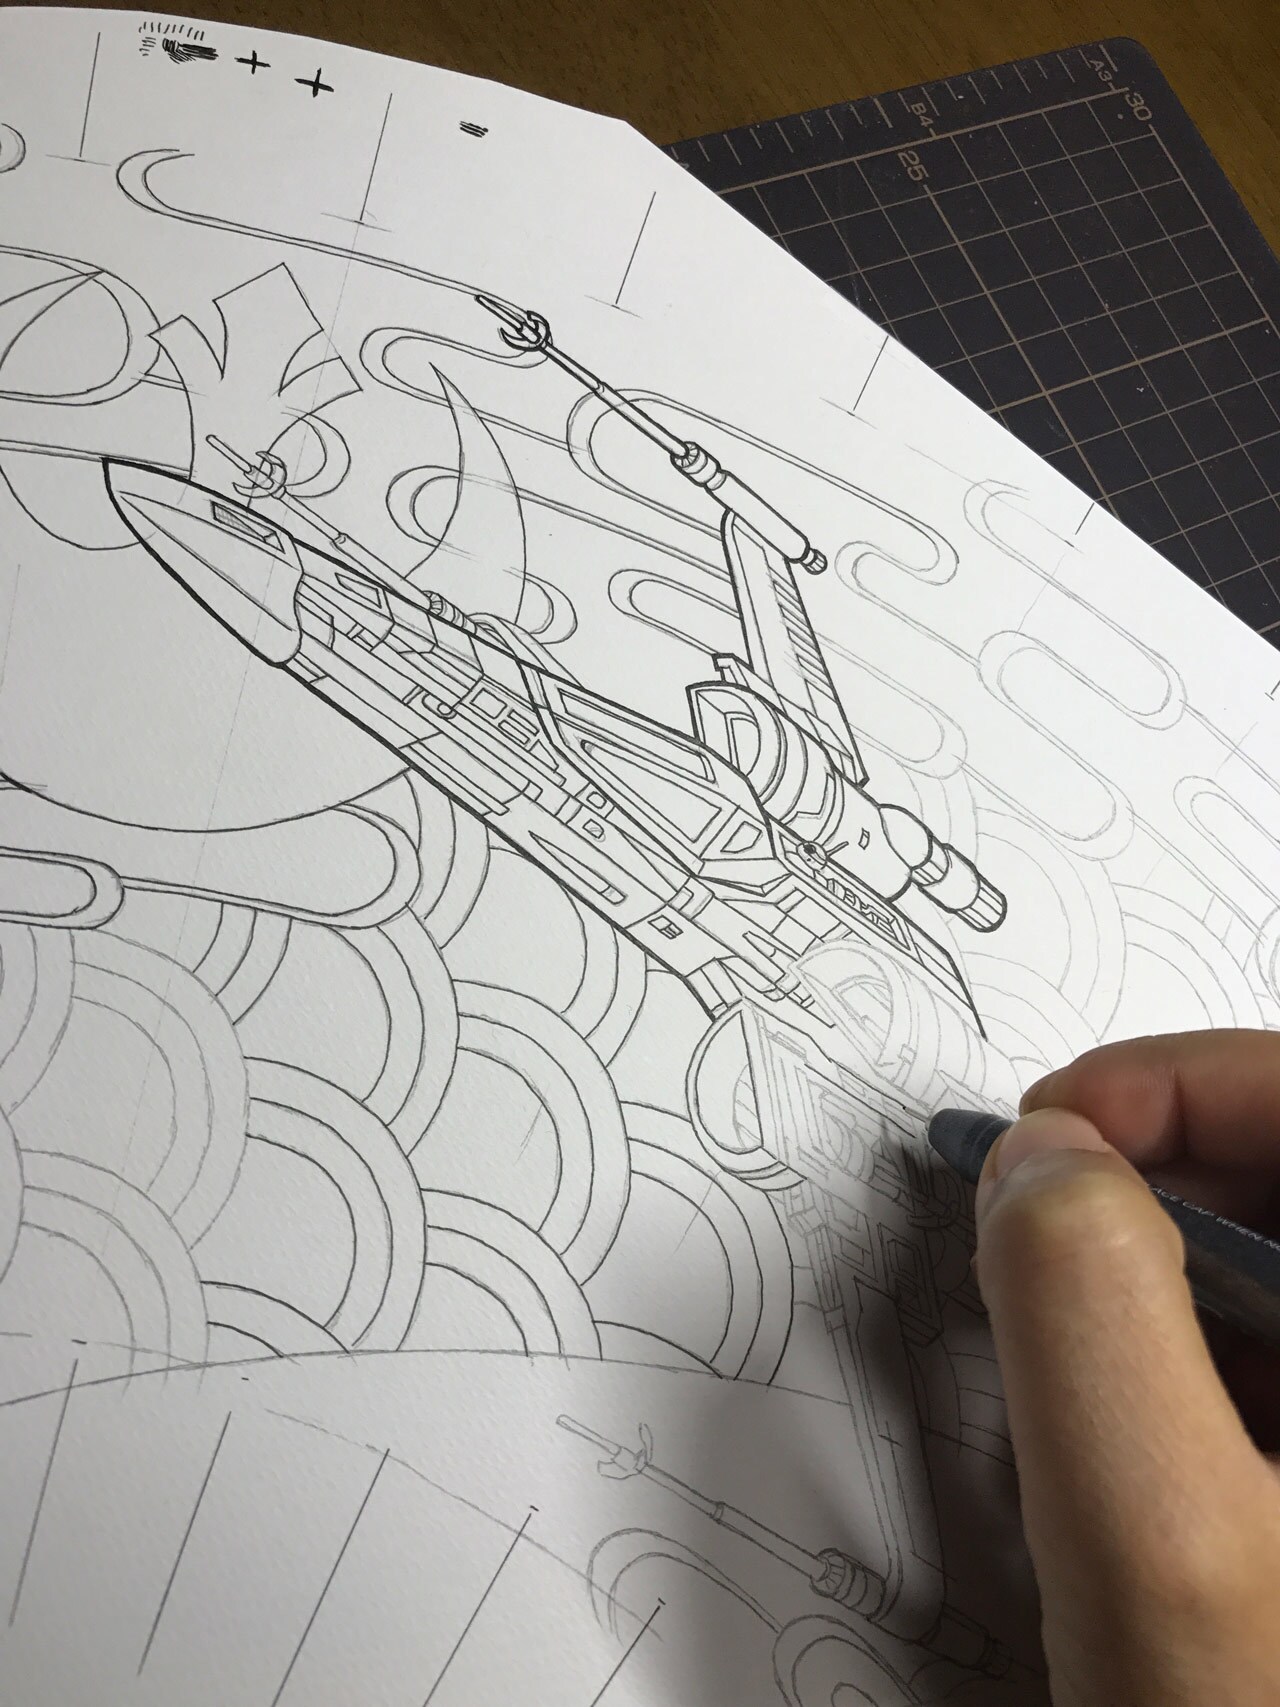 A pencil drawing of a starfighter being traced with an ink pen.